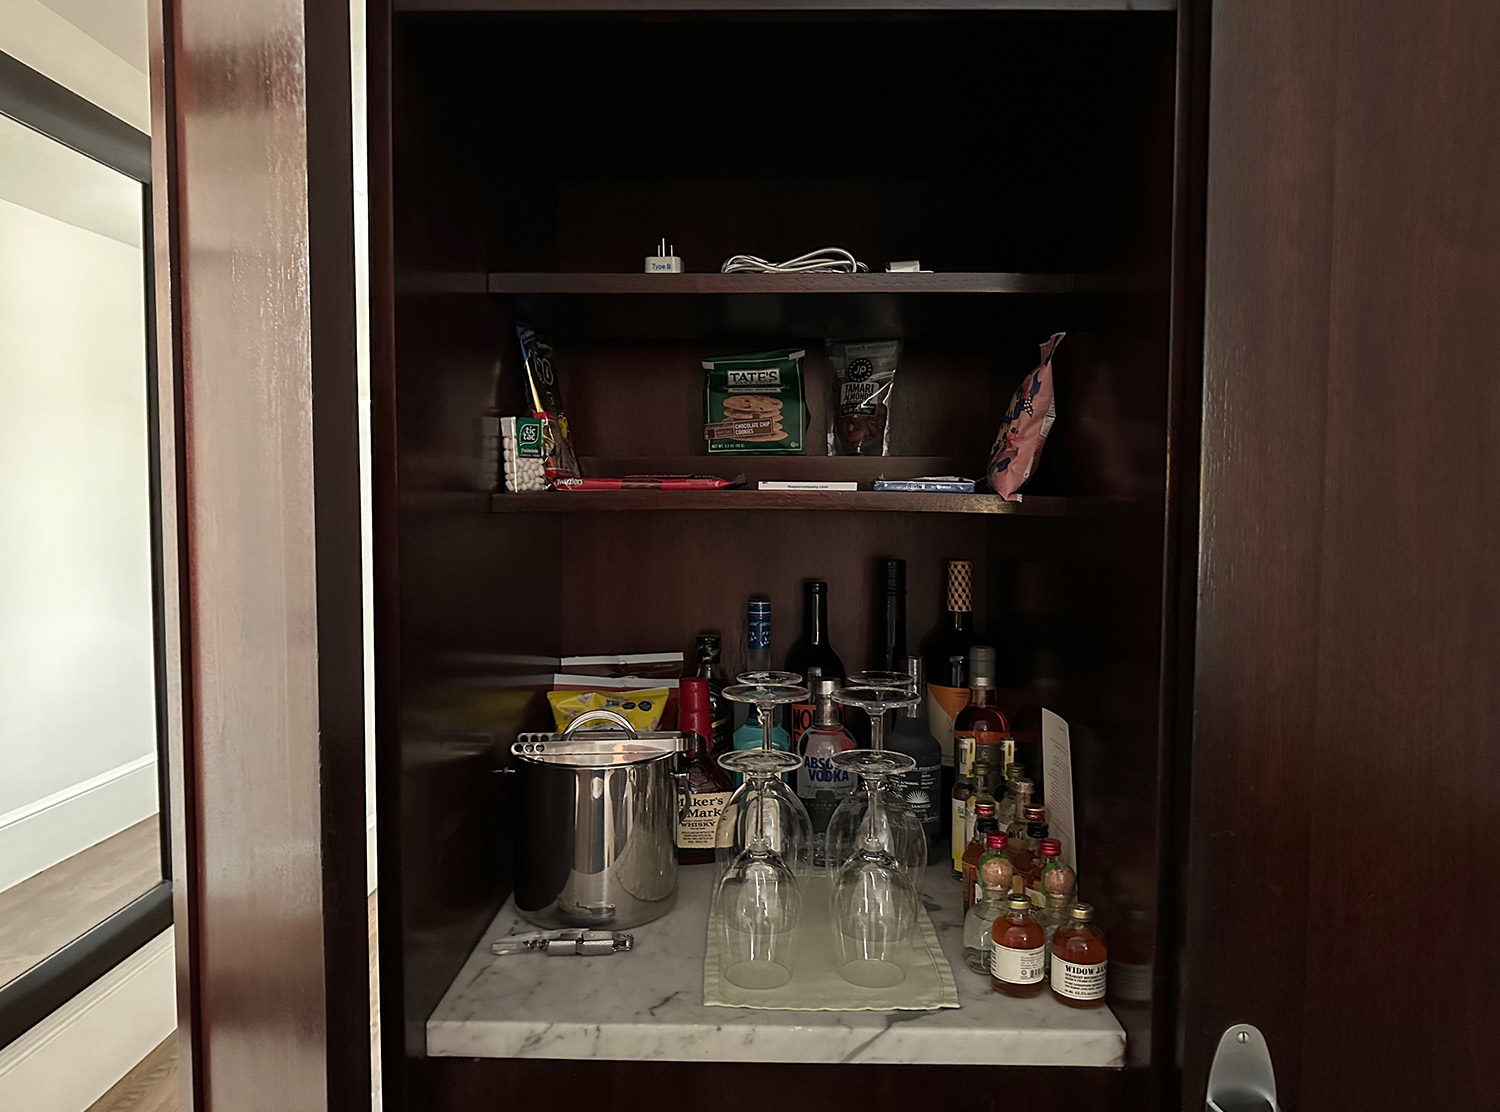 Mercer Hotel A fully stocked minibar ensures you never go hungry